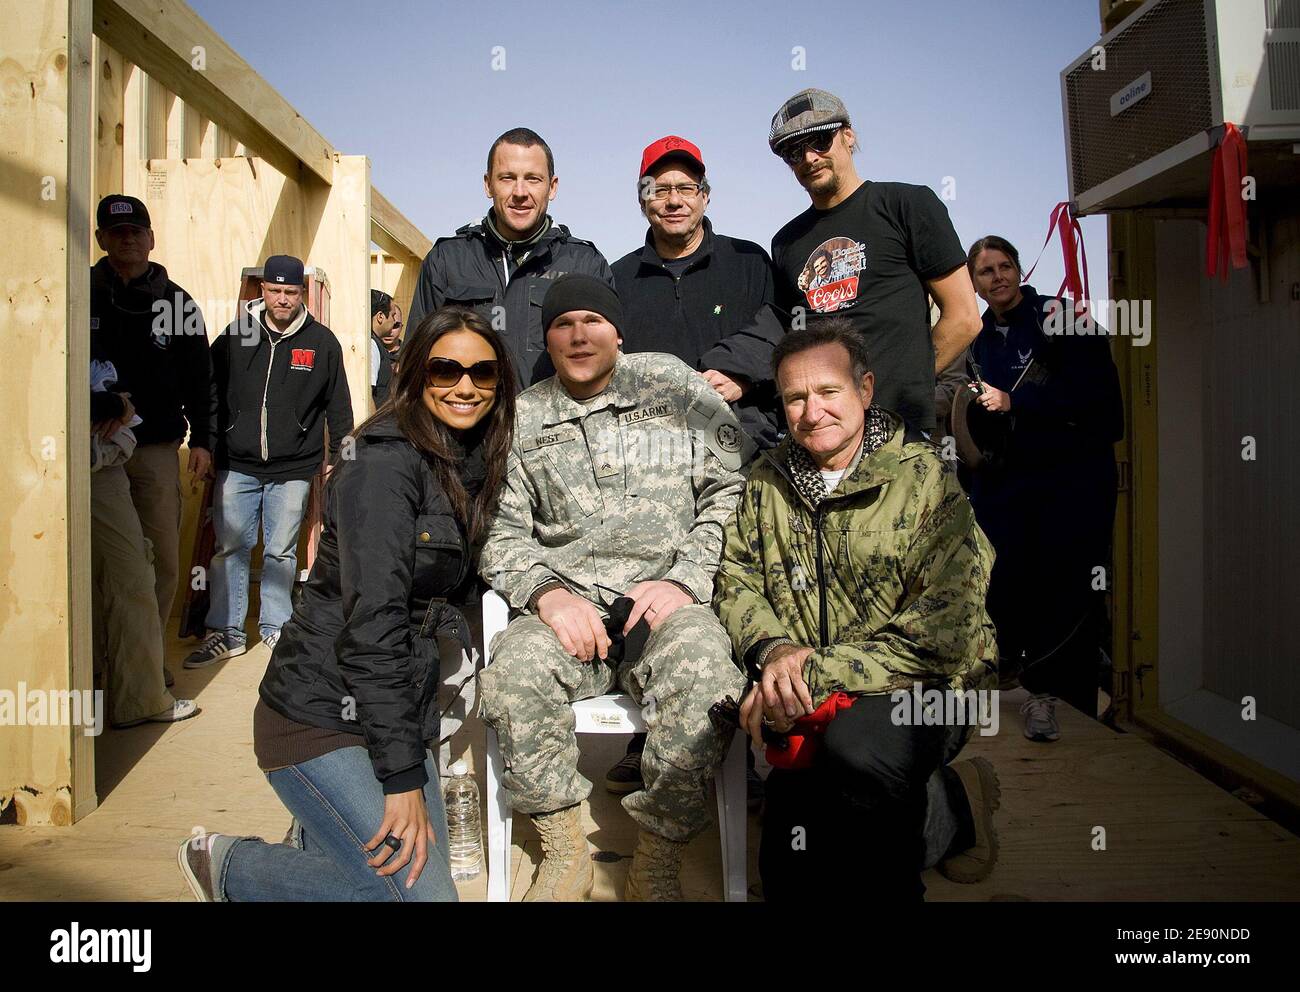 Seven time Tour de France champion Lance Armstrong, Comedian Lewis Black, musician Kid Rock, Miss USA Rachel Smith and comedian Robin Williams pose for a photo with wounded warrior Jordan West of Chicago during the 2007 USO Holiday Tour stop at Logistics Support Area Anaconda in Balad, Iraq, on December 20, 2007. Photo by DOD via ABACAPRESS.COM Stock Photo